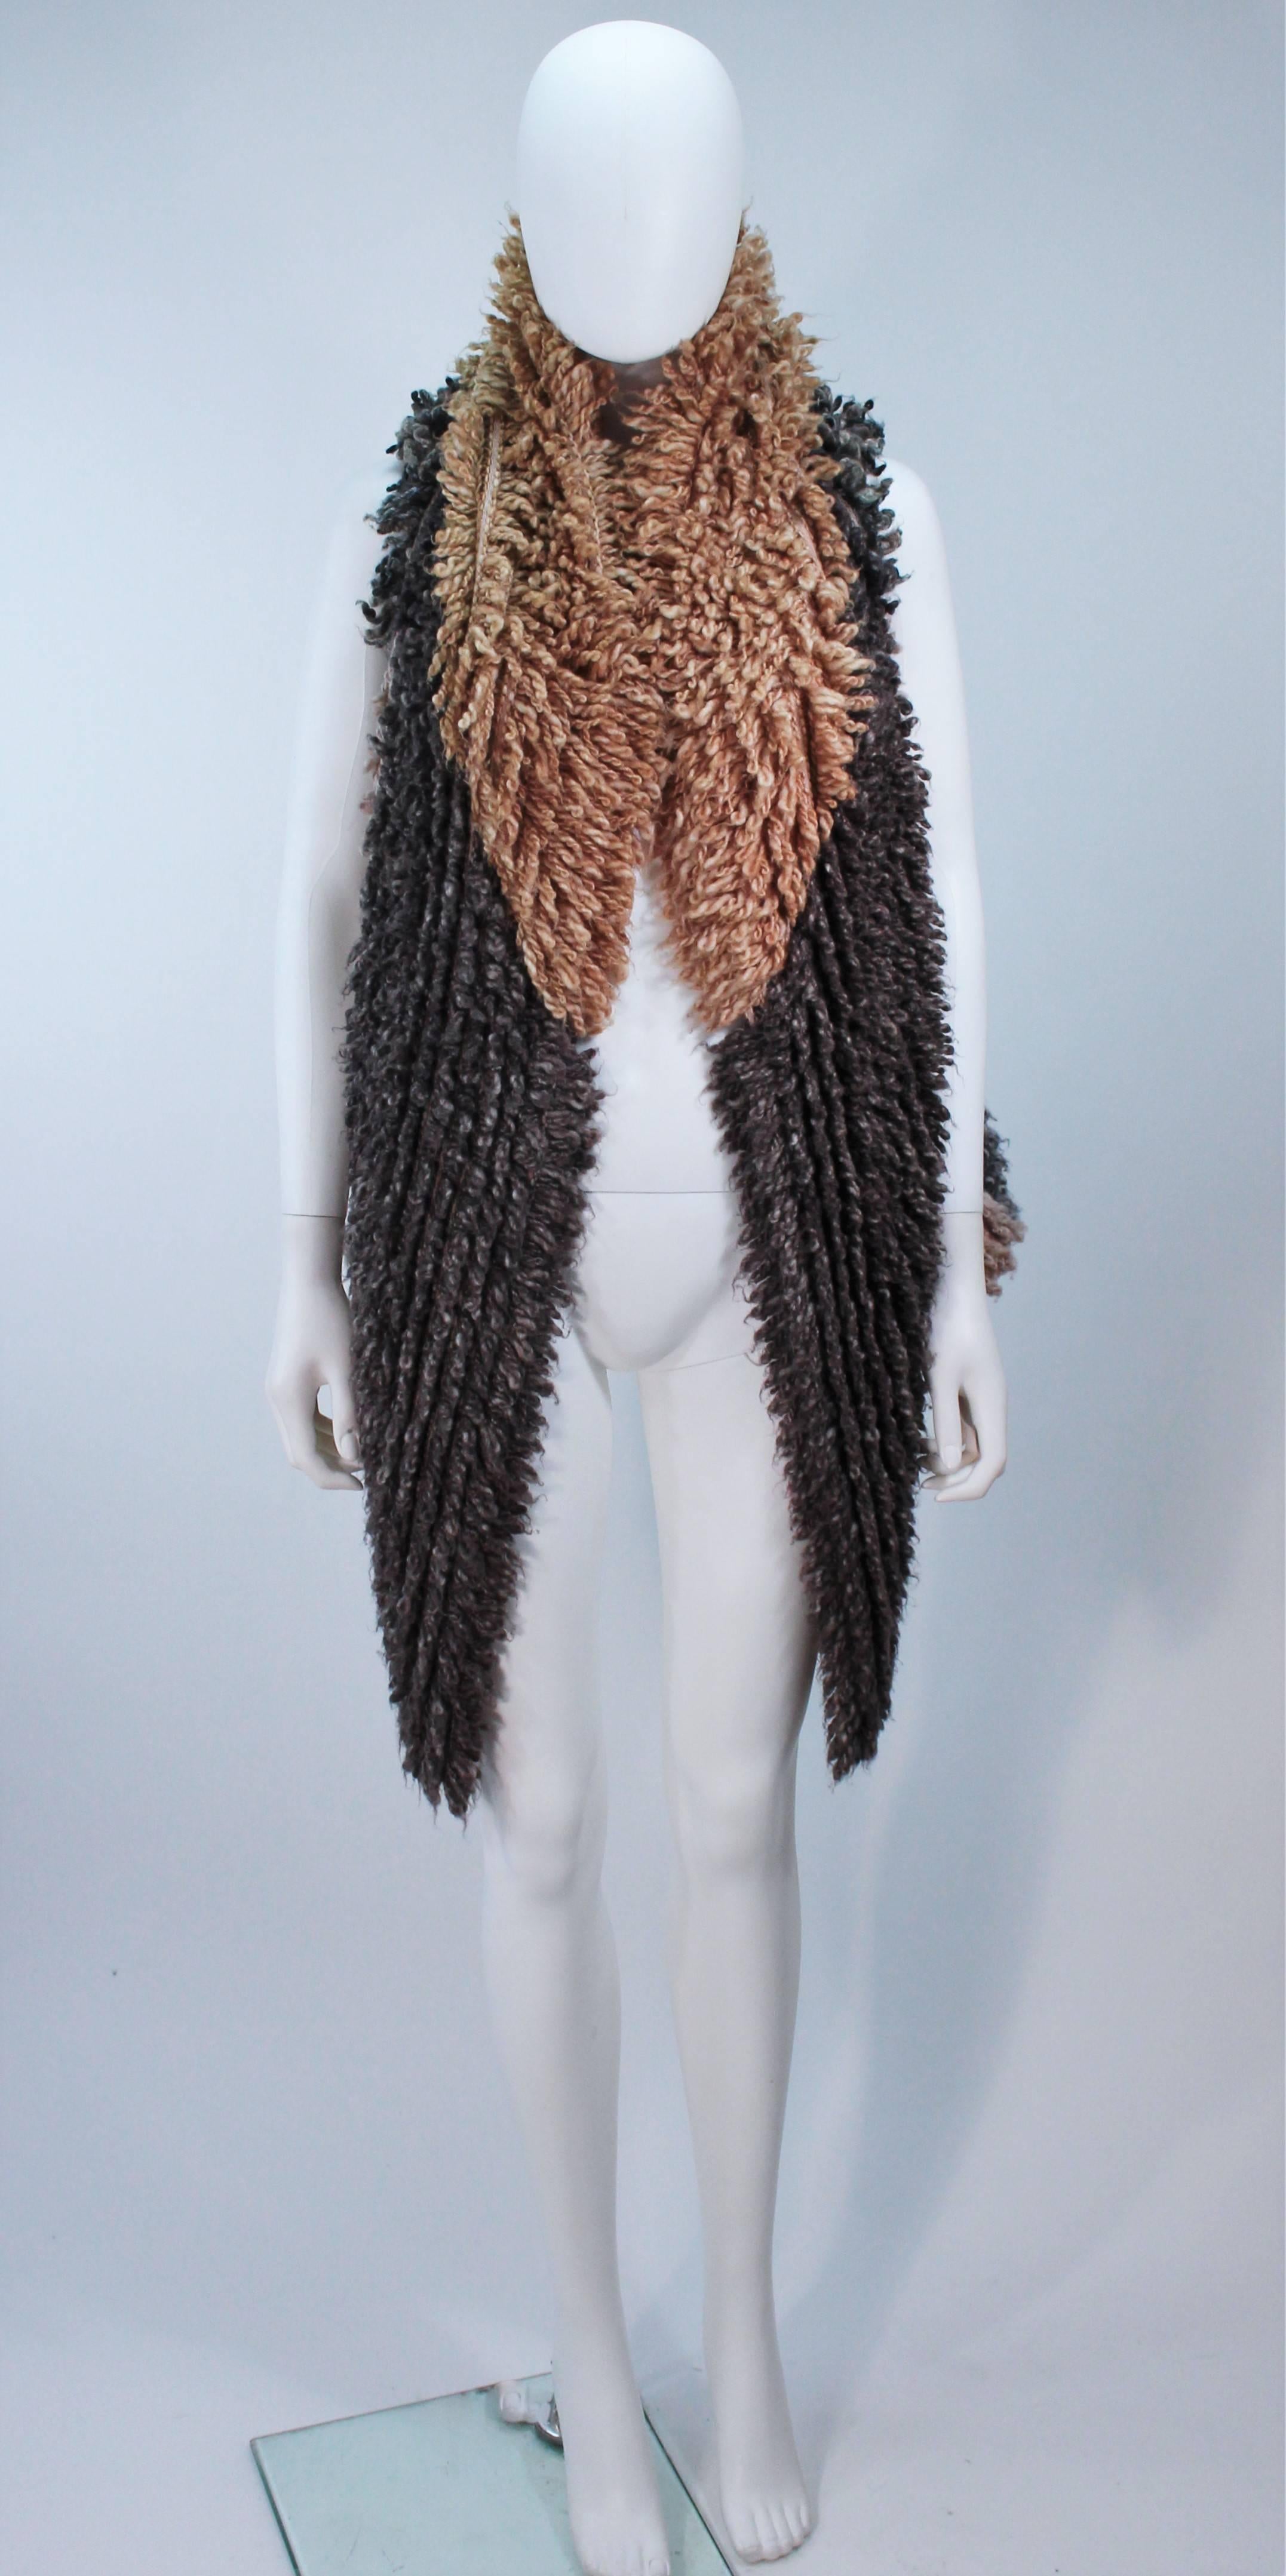  This Missoni  vest is composed of a grey and caramel shaggy material. Features an open style front. In great, like new condition. 

  **Please cross-reference measurements for personal accuracy. Size in description box is an